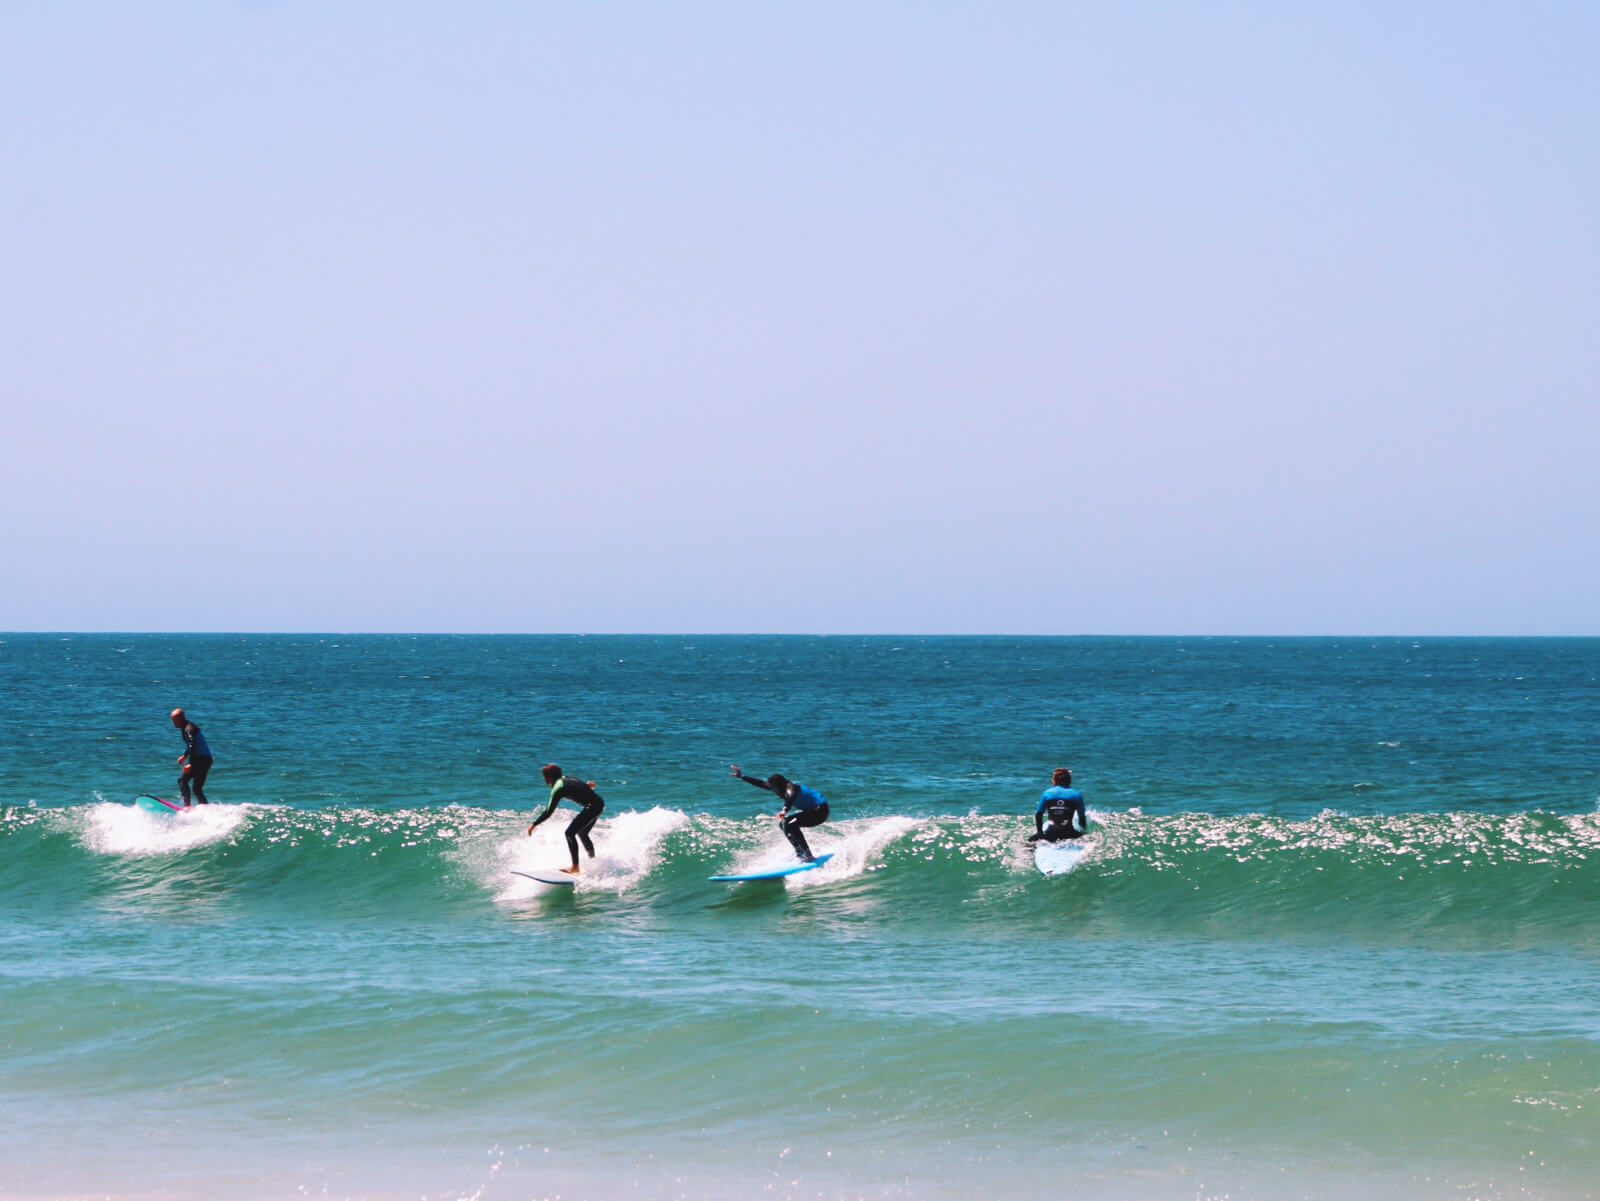 4 surfers on the wave riding a party wave